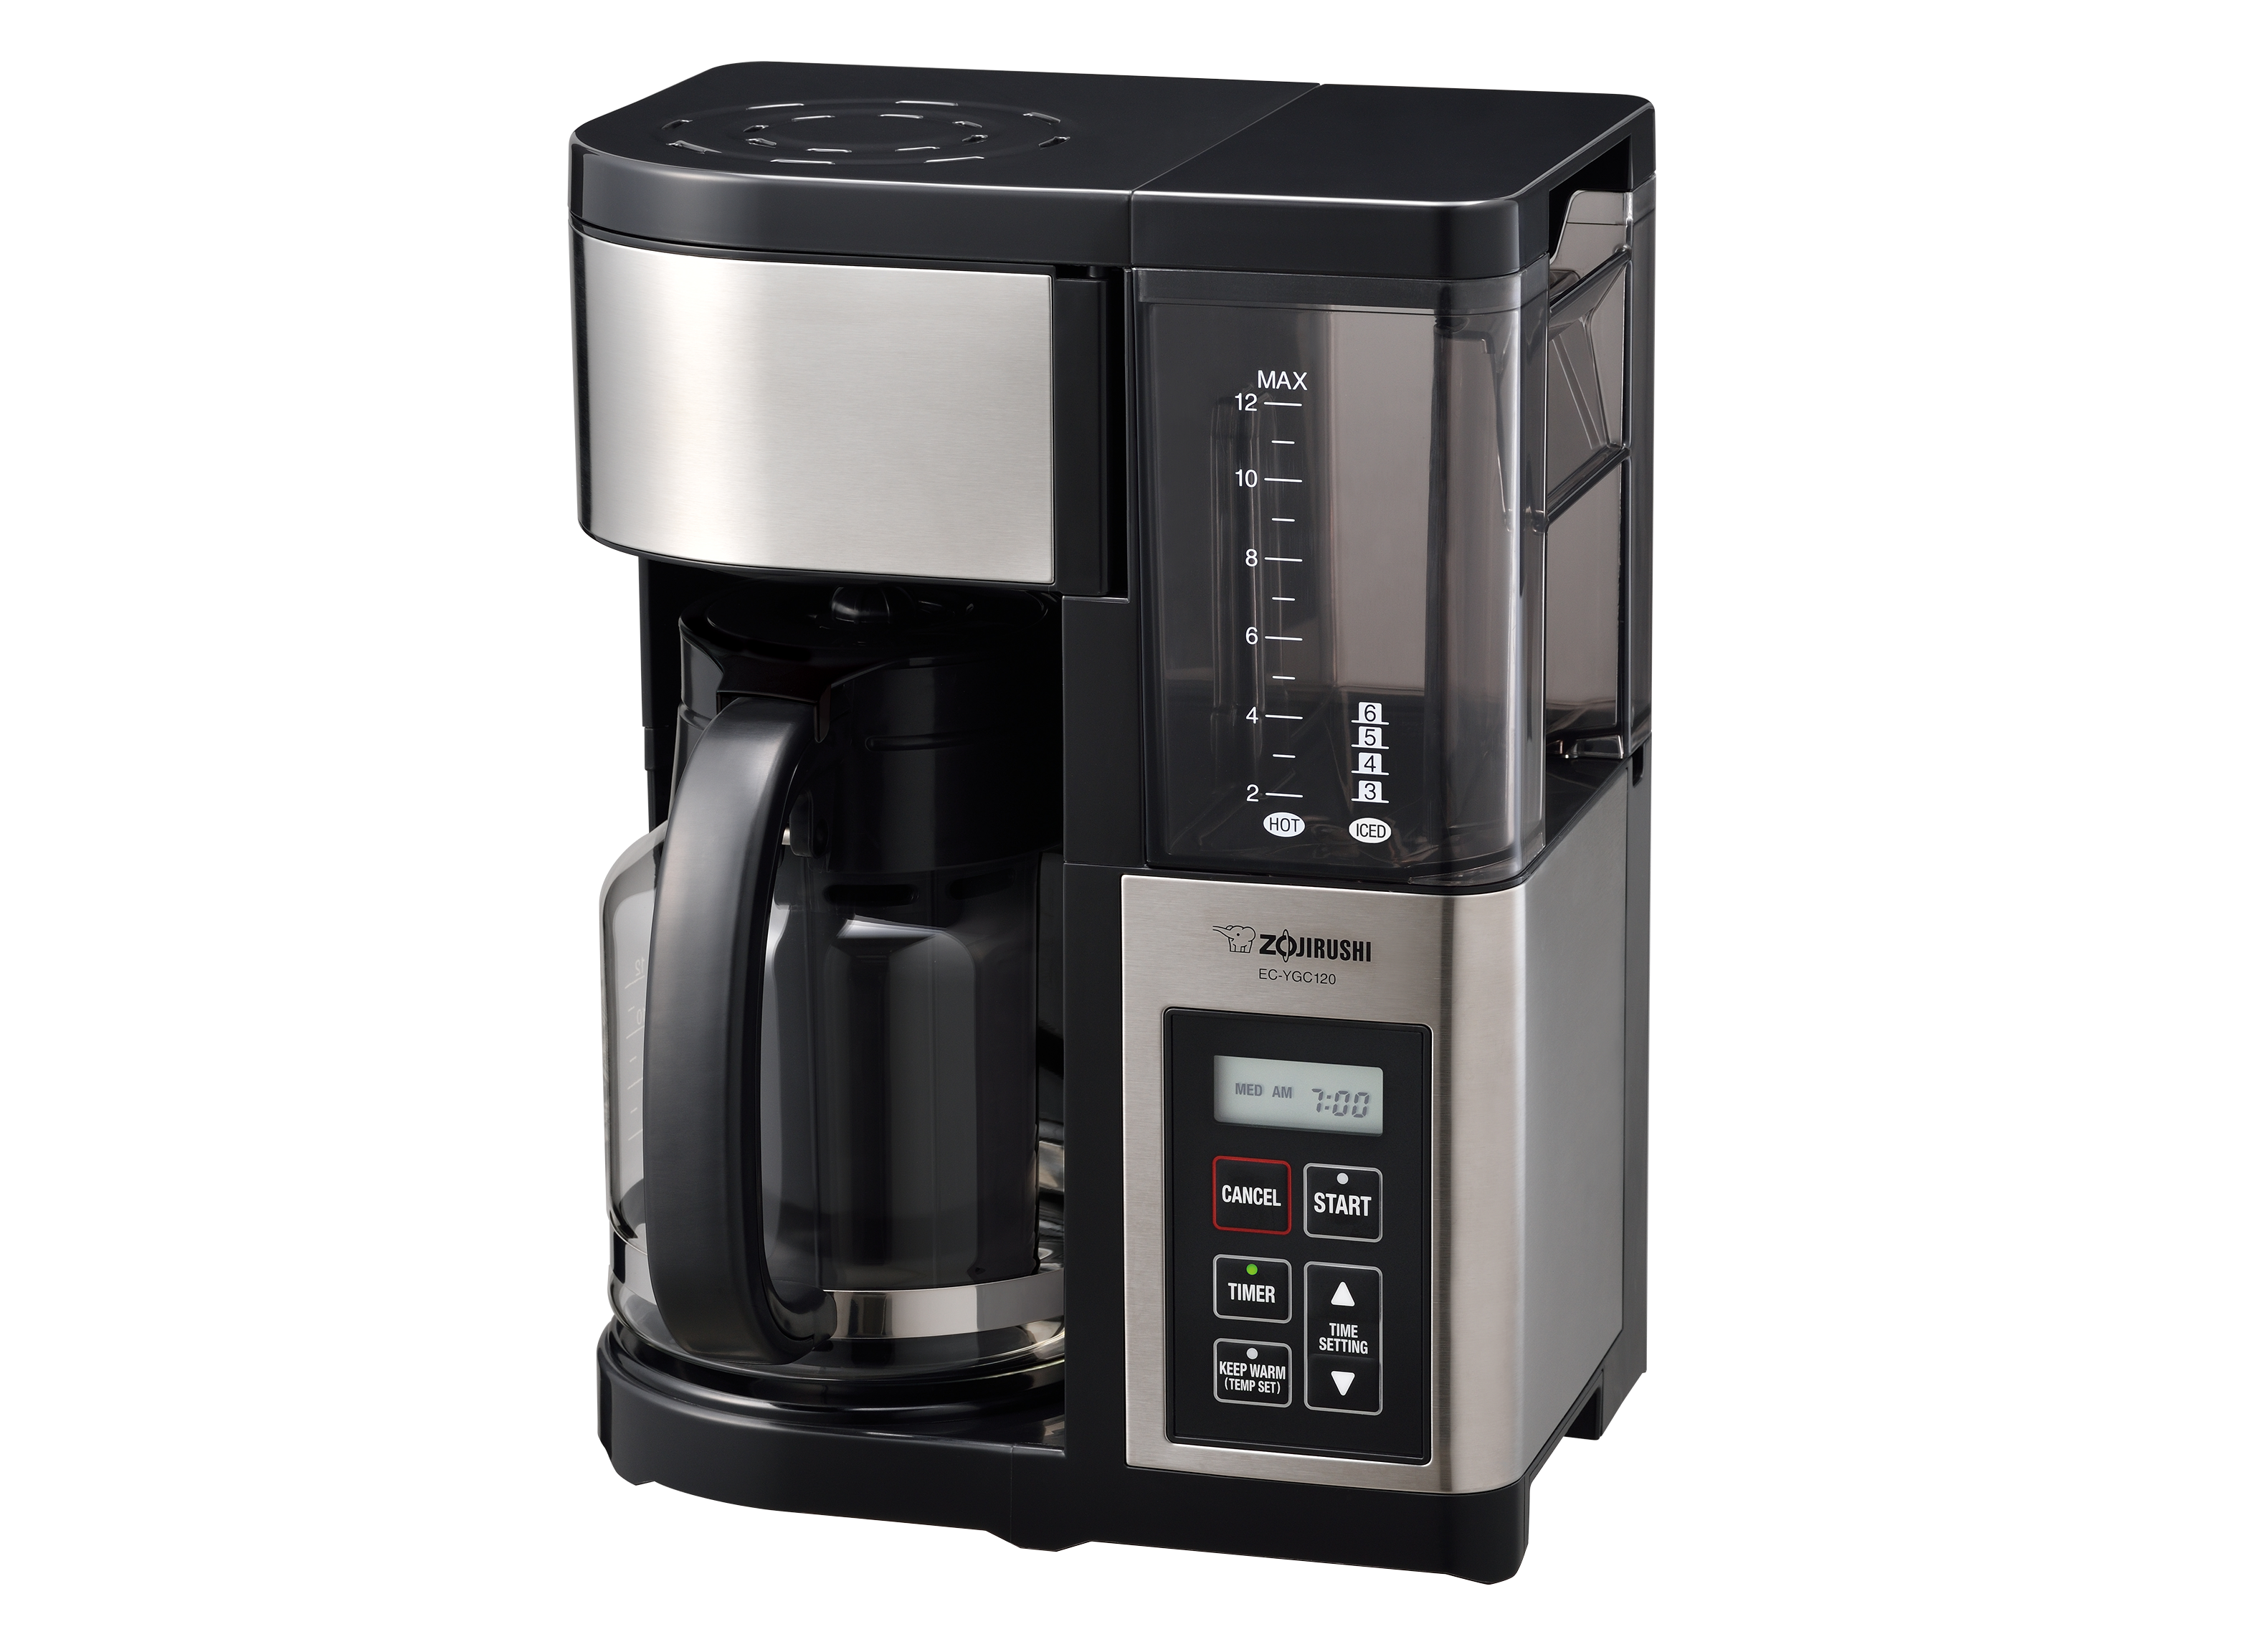 https://crdms.images.consumerreports.org/prod/products/cr/models/406306-drip-coffee-makers-with-carafe-zojirushi-fresh-brew-plus-12-cup-ec-ygc120-10029001.png